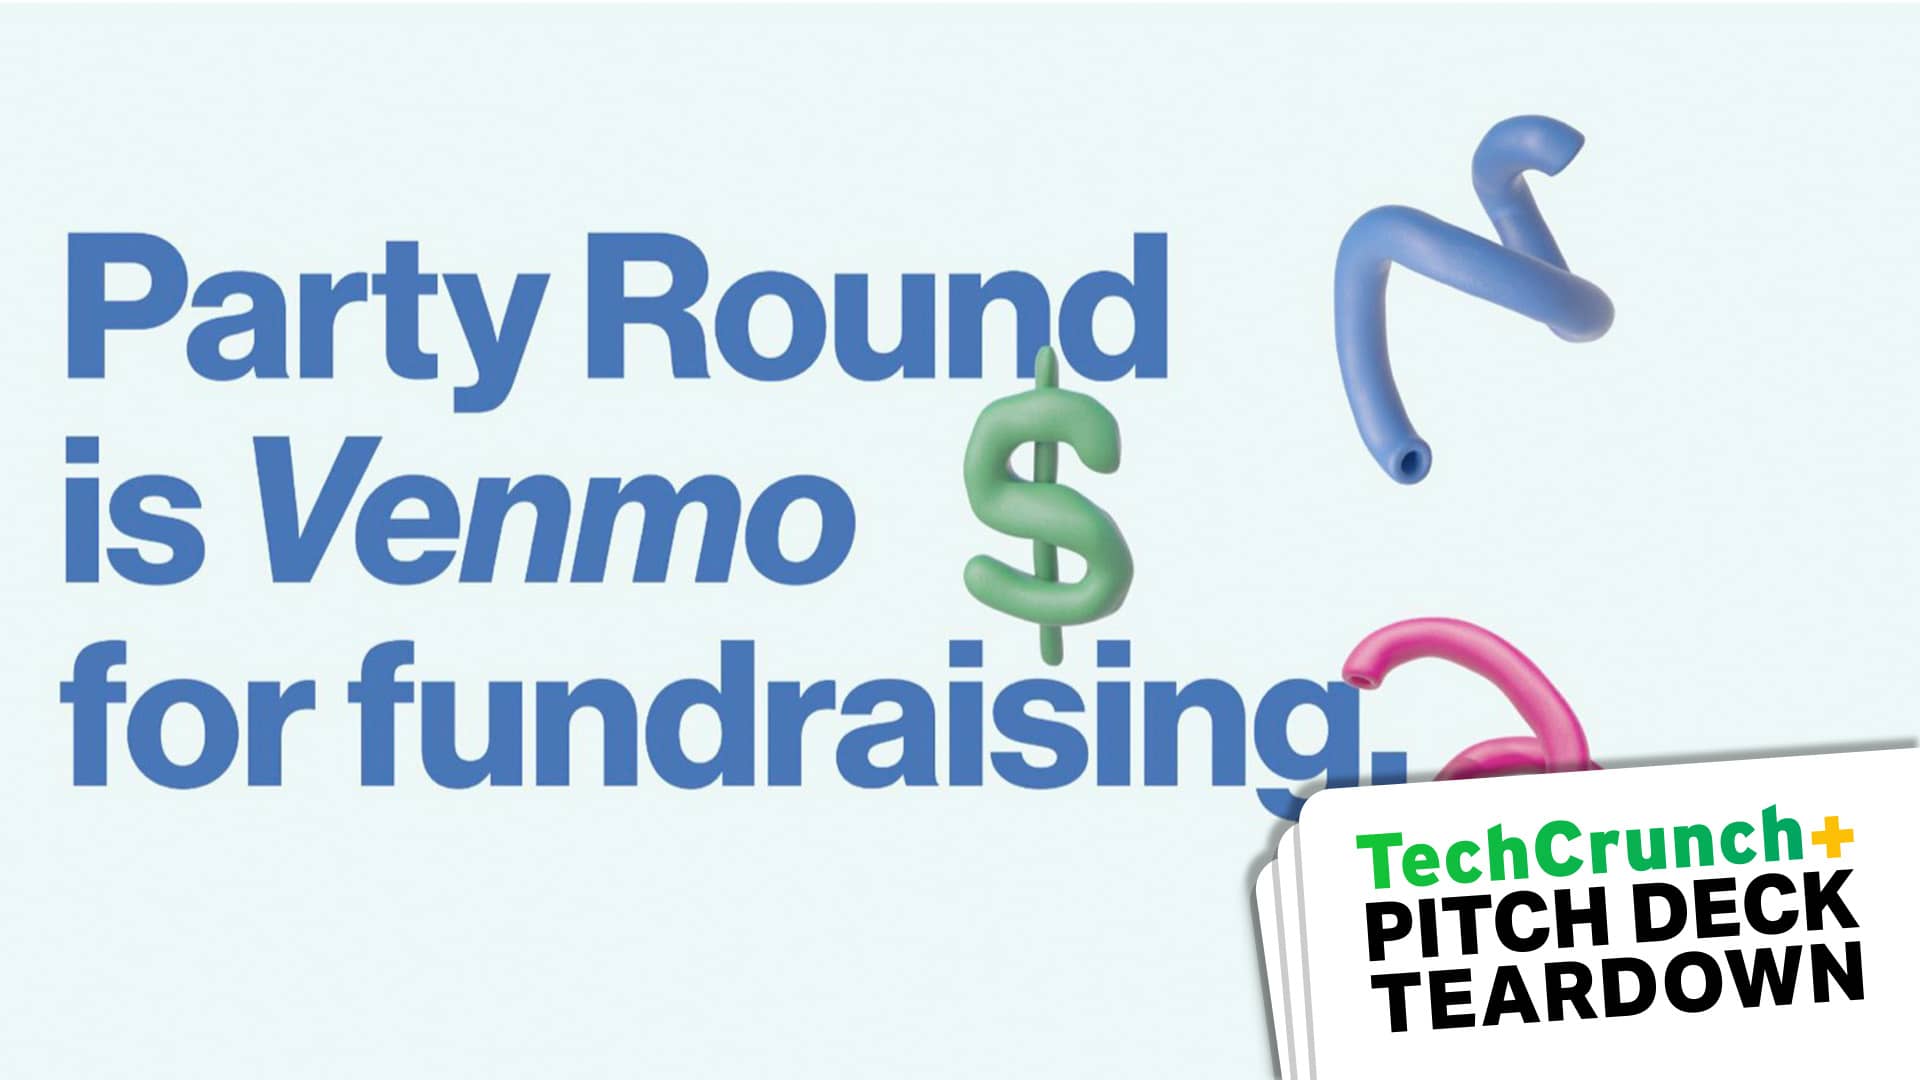 Cover slide reading 'Party Round is Venmo for Fundraising'